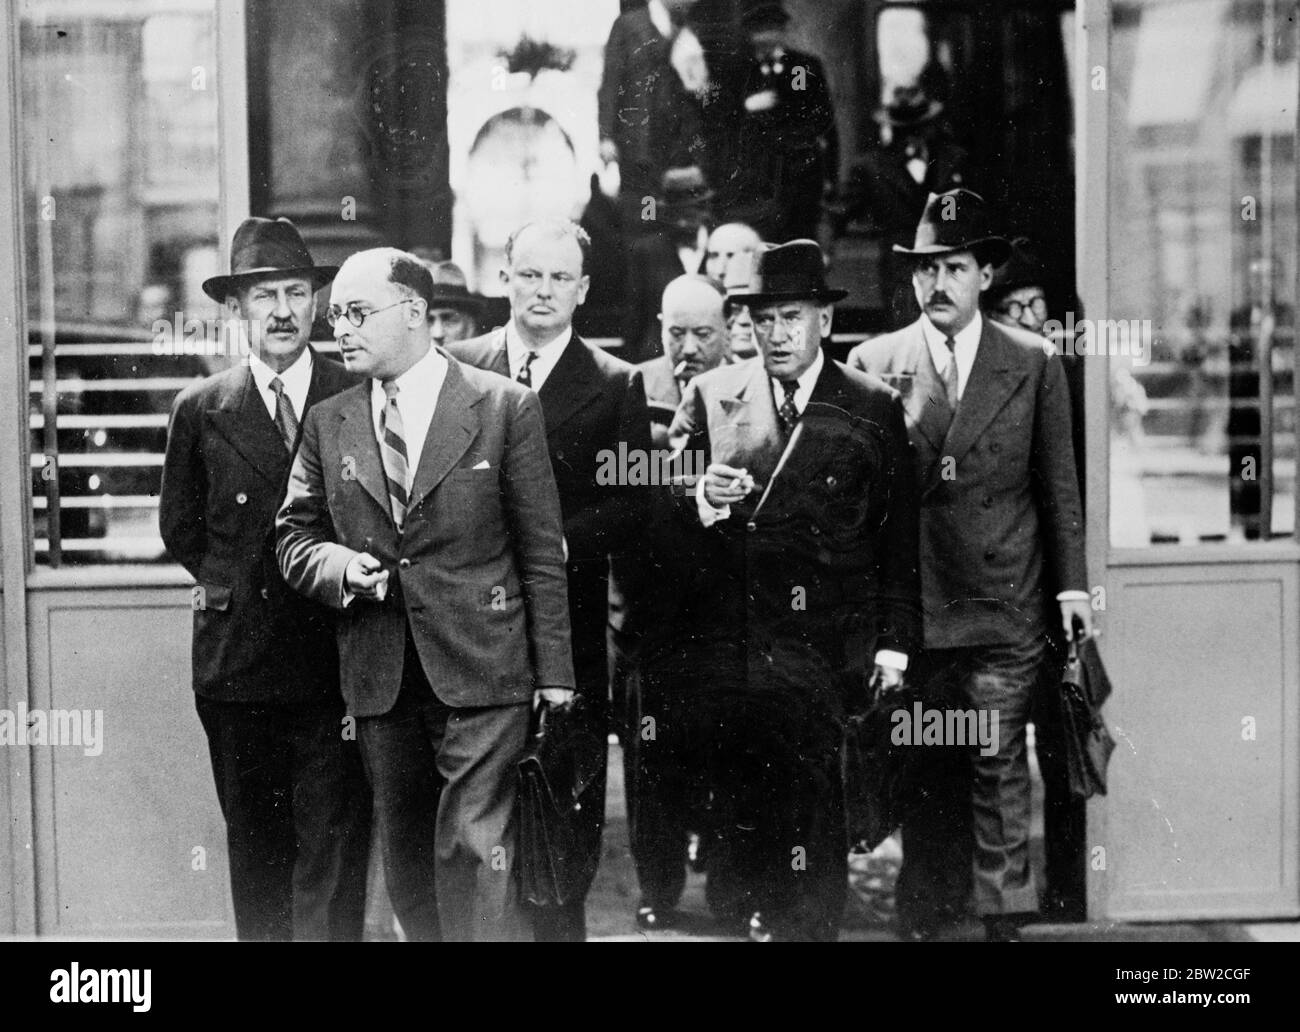 The French cabinet met by the Elysee Palace in Paris under the presidentcy of President Albert Lebrun to consider the serious situation brought about by Germany's attack on Poland. The ministers decided to order general, mobilisation. Photo shows Mr Edouard Daladier (second from right) wearing a grave expression as he left with the Ministers after the meeting - left-to-right- Mr Camille Chautemps, Vice Premier; Mr Jean Zay, education; Mr Pomaret; Mr Alfred Jules Julien, Posts and Telegraphs; Mr Edouard Daladier; and Mr Guy La Chambre, Air. 2 September 1939 Stock Photo